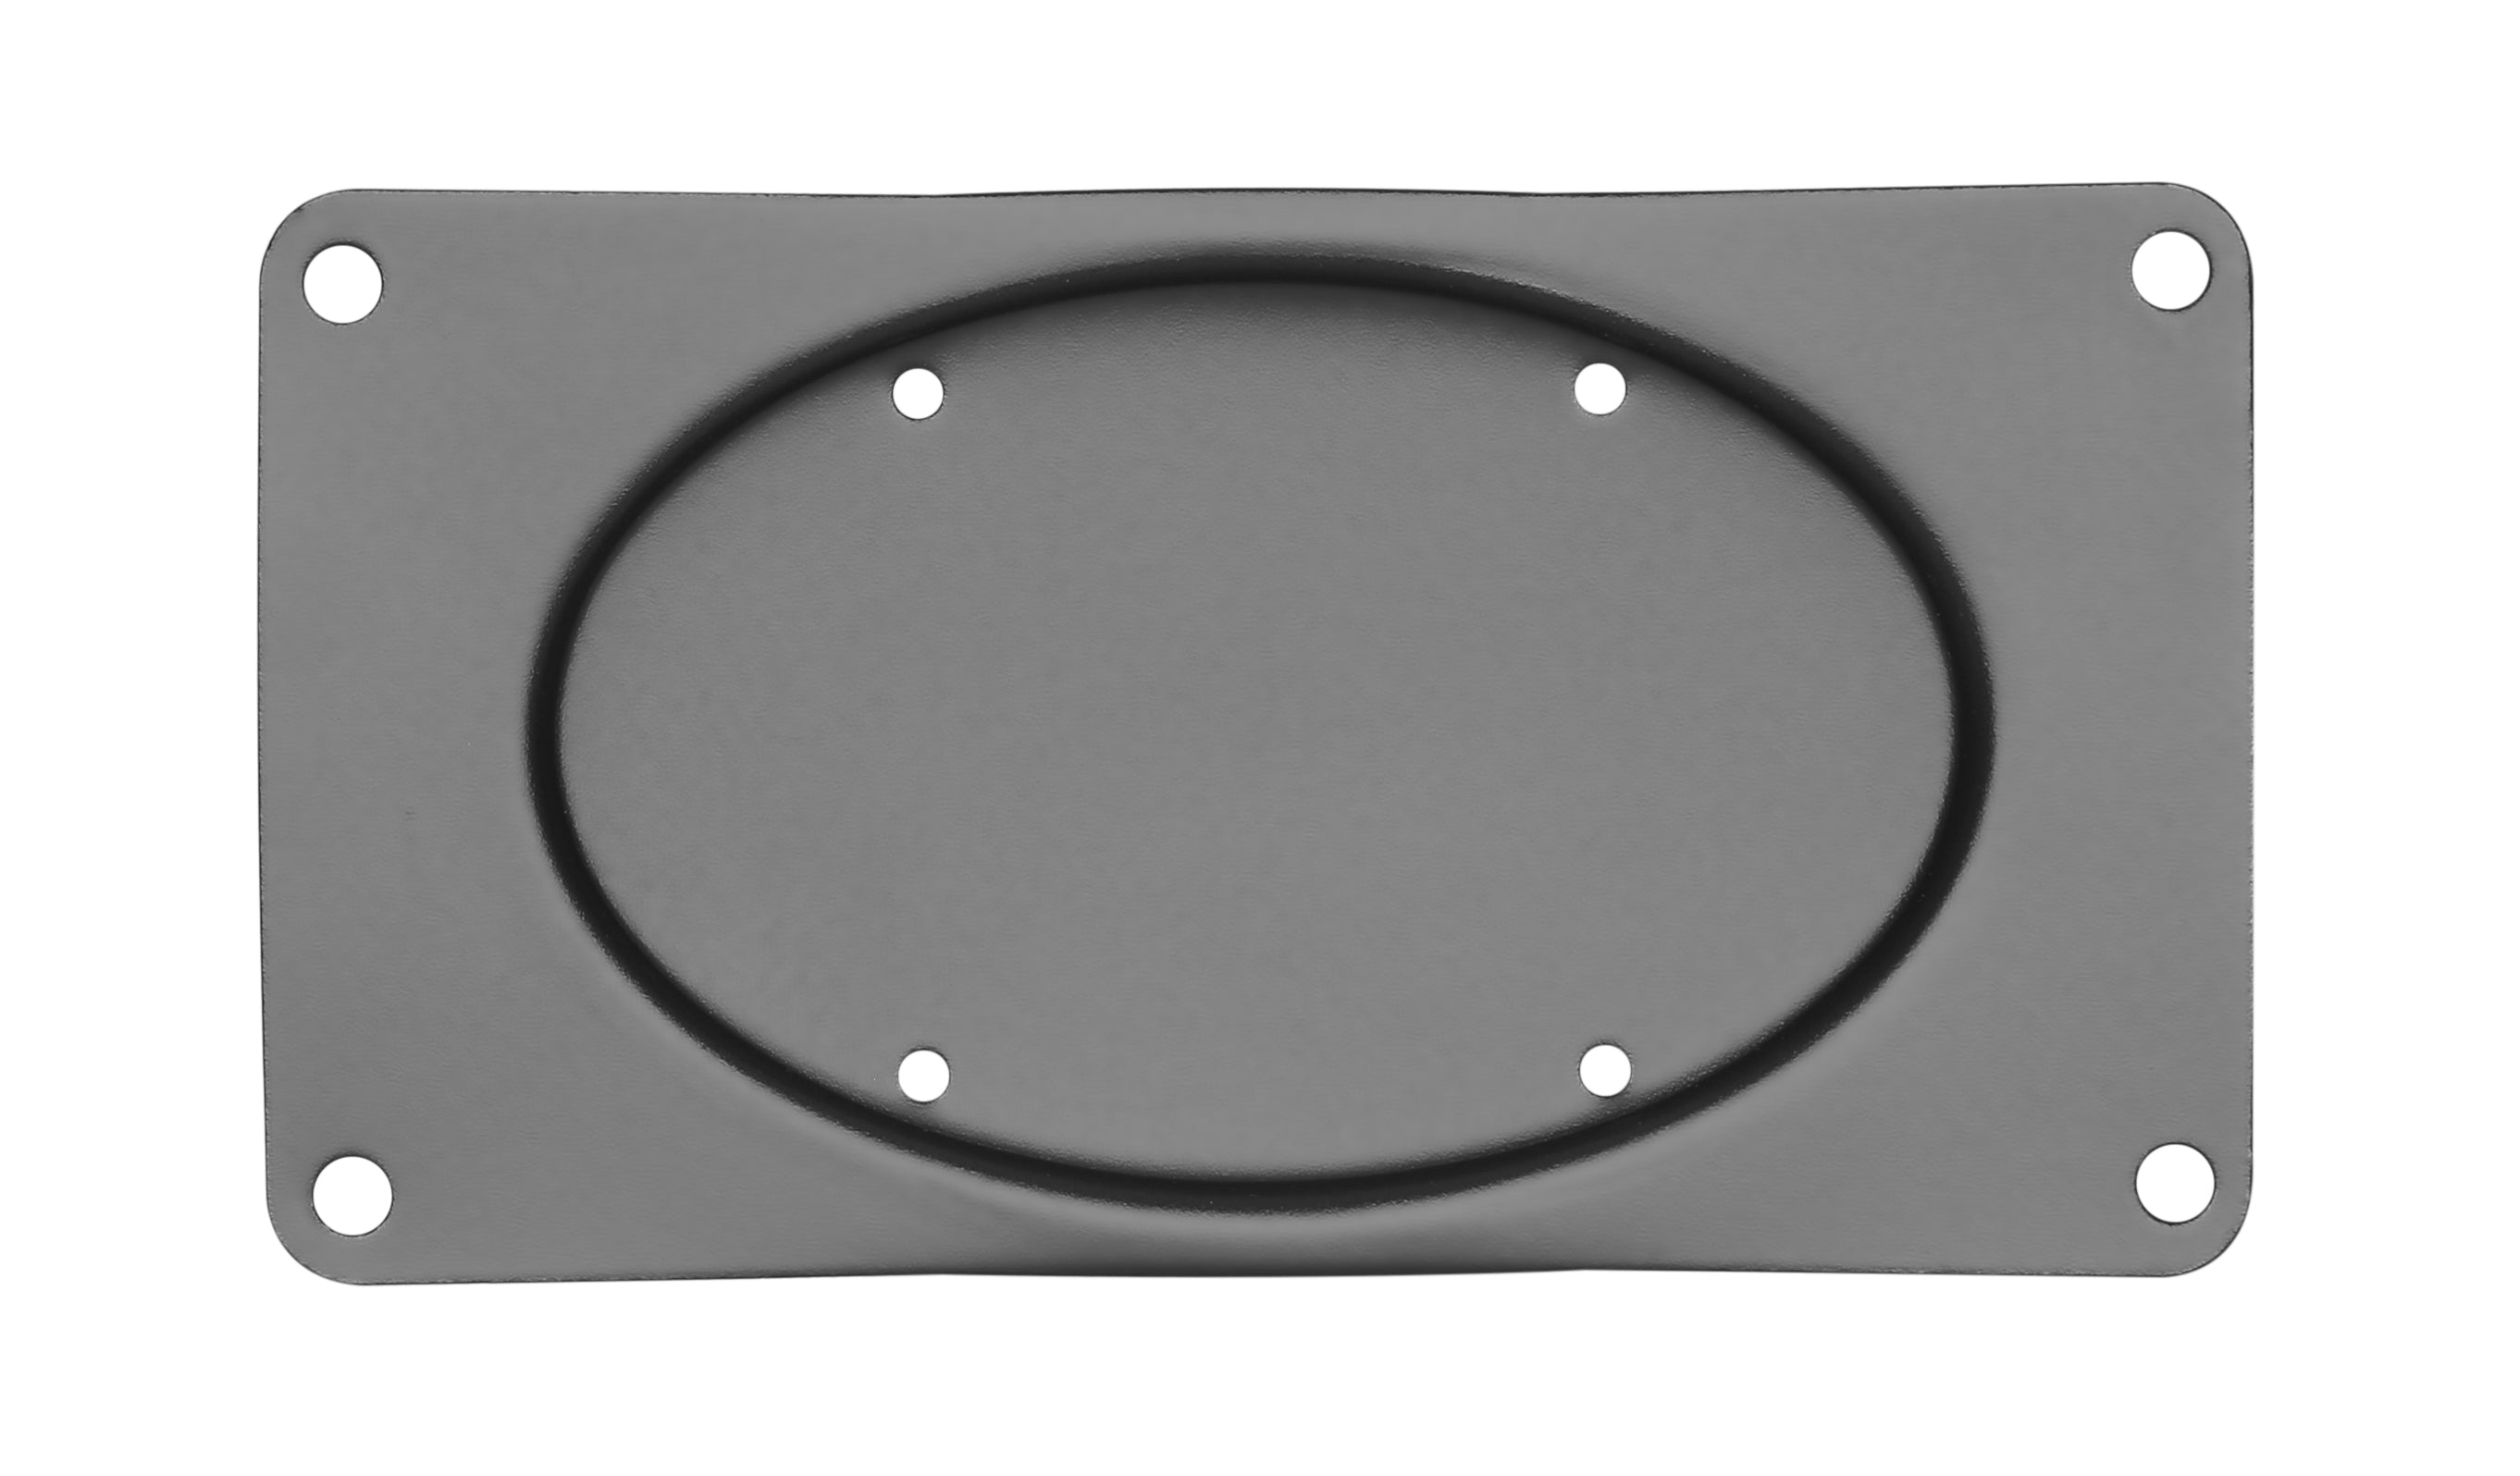 Monitor Arm VESA Extension Adaptor Plate fits 200 x 100 Mounting Pattern